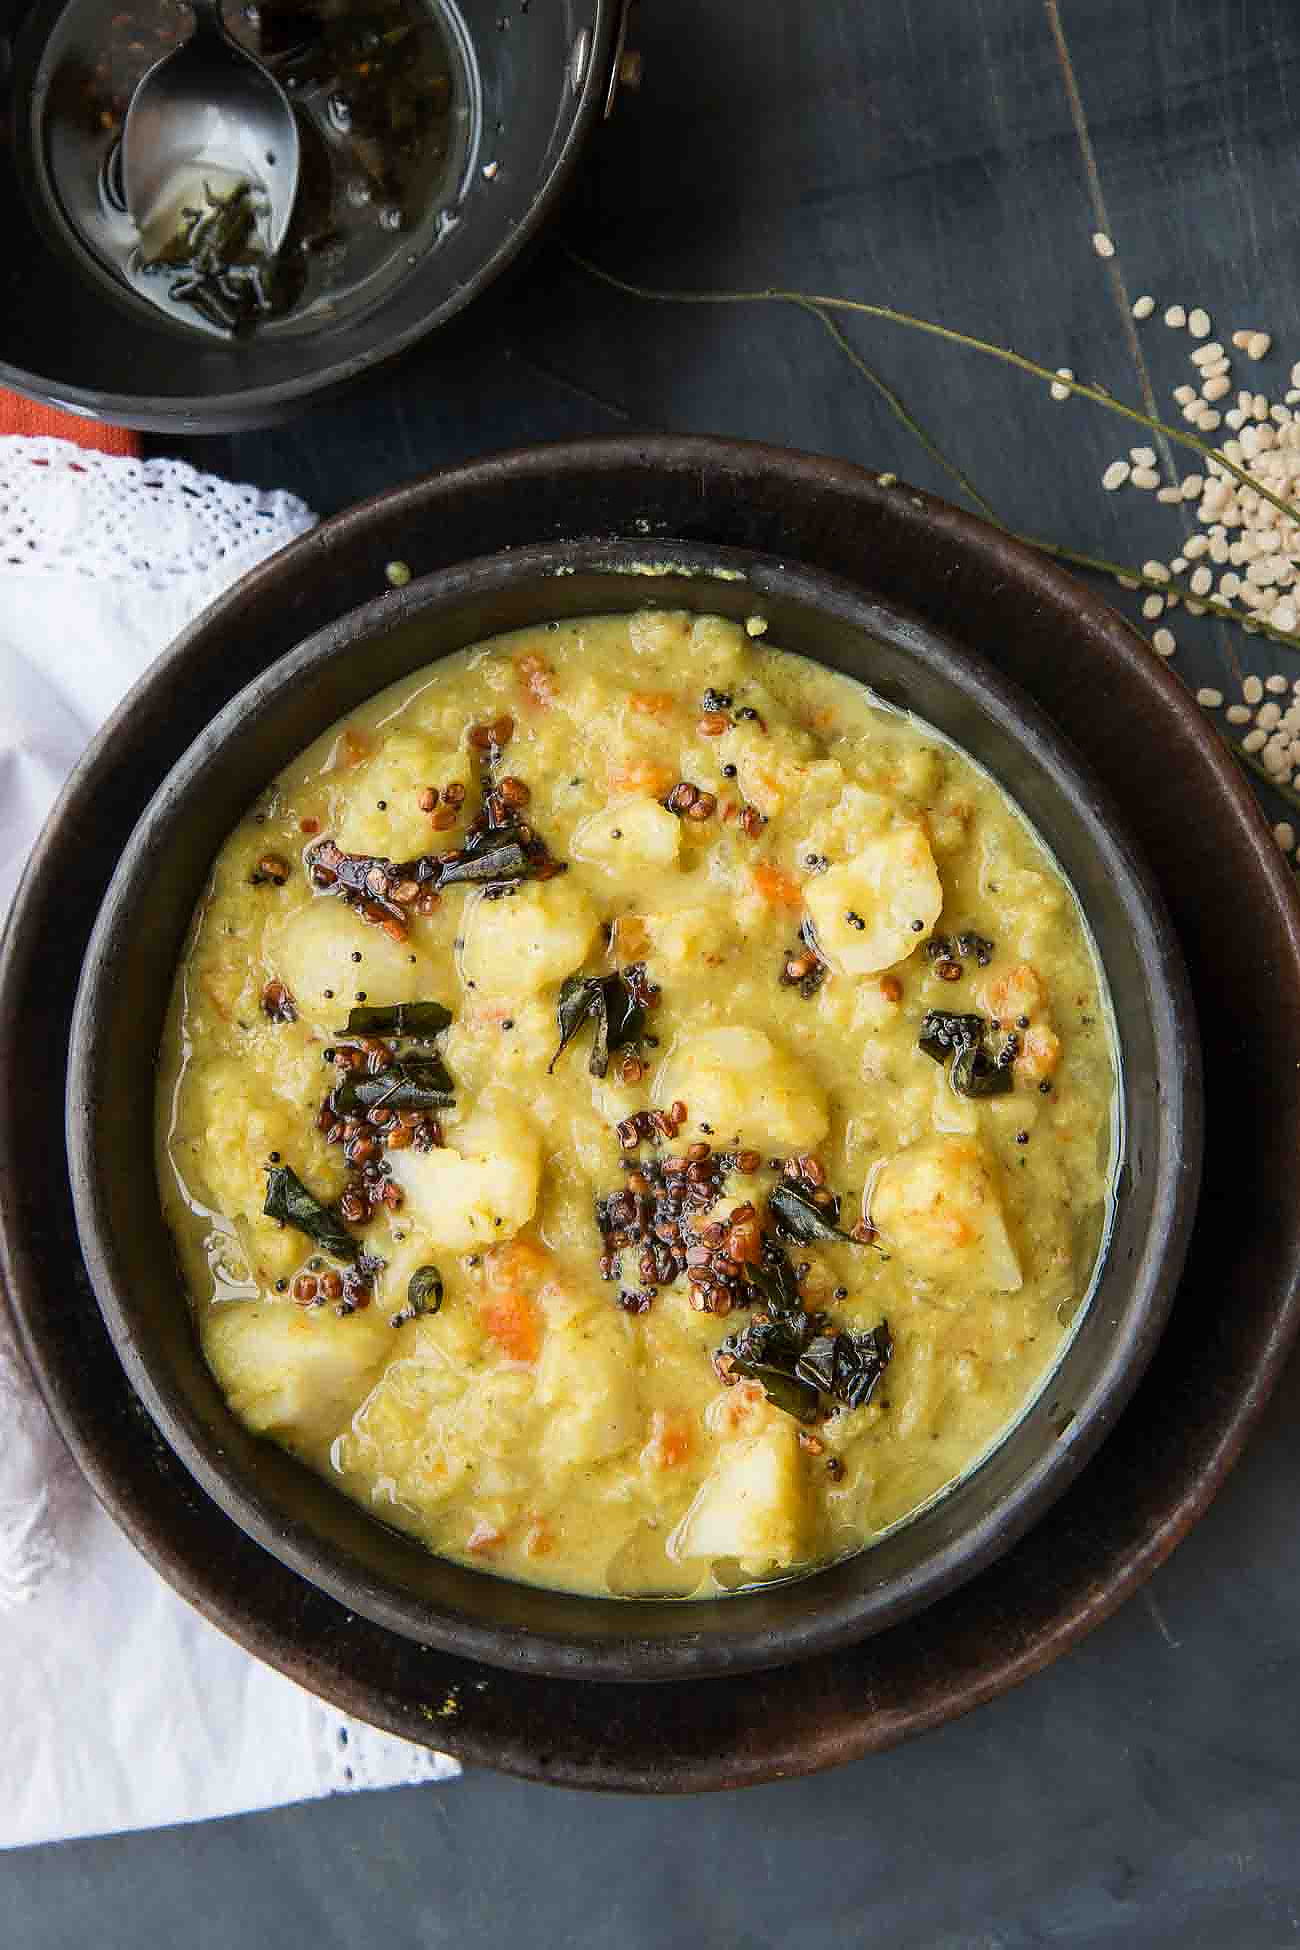 Mixed Vegetable Poricha Kootu Recipe (Steamed Vegetable in Coconut and Lentil Curry)